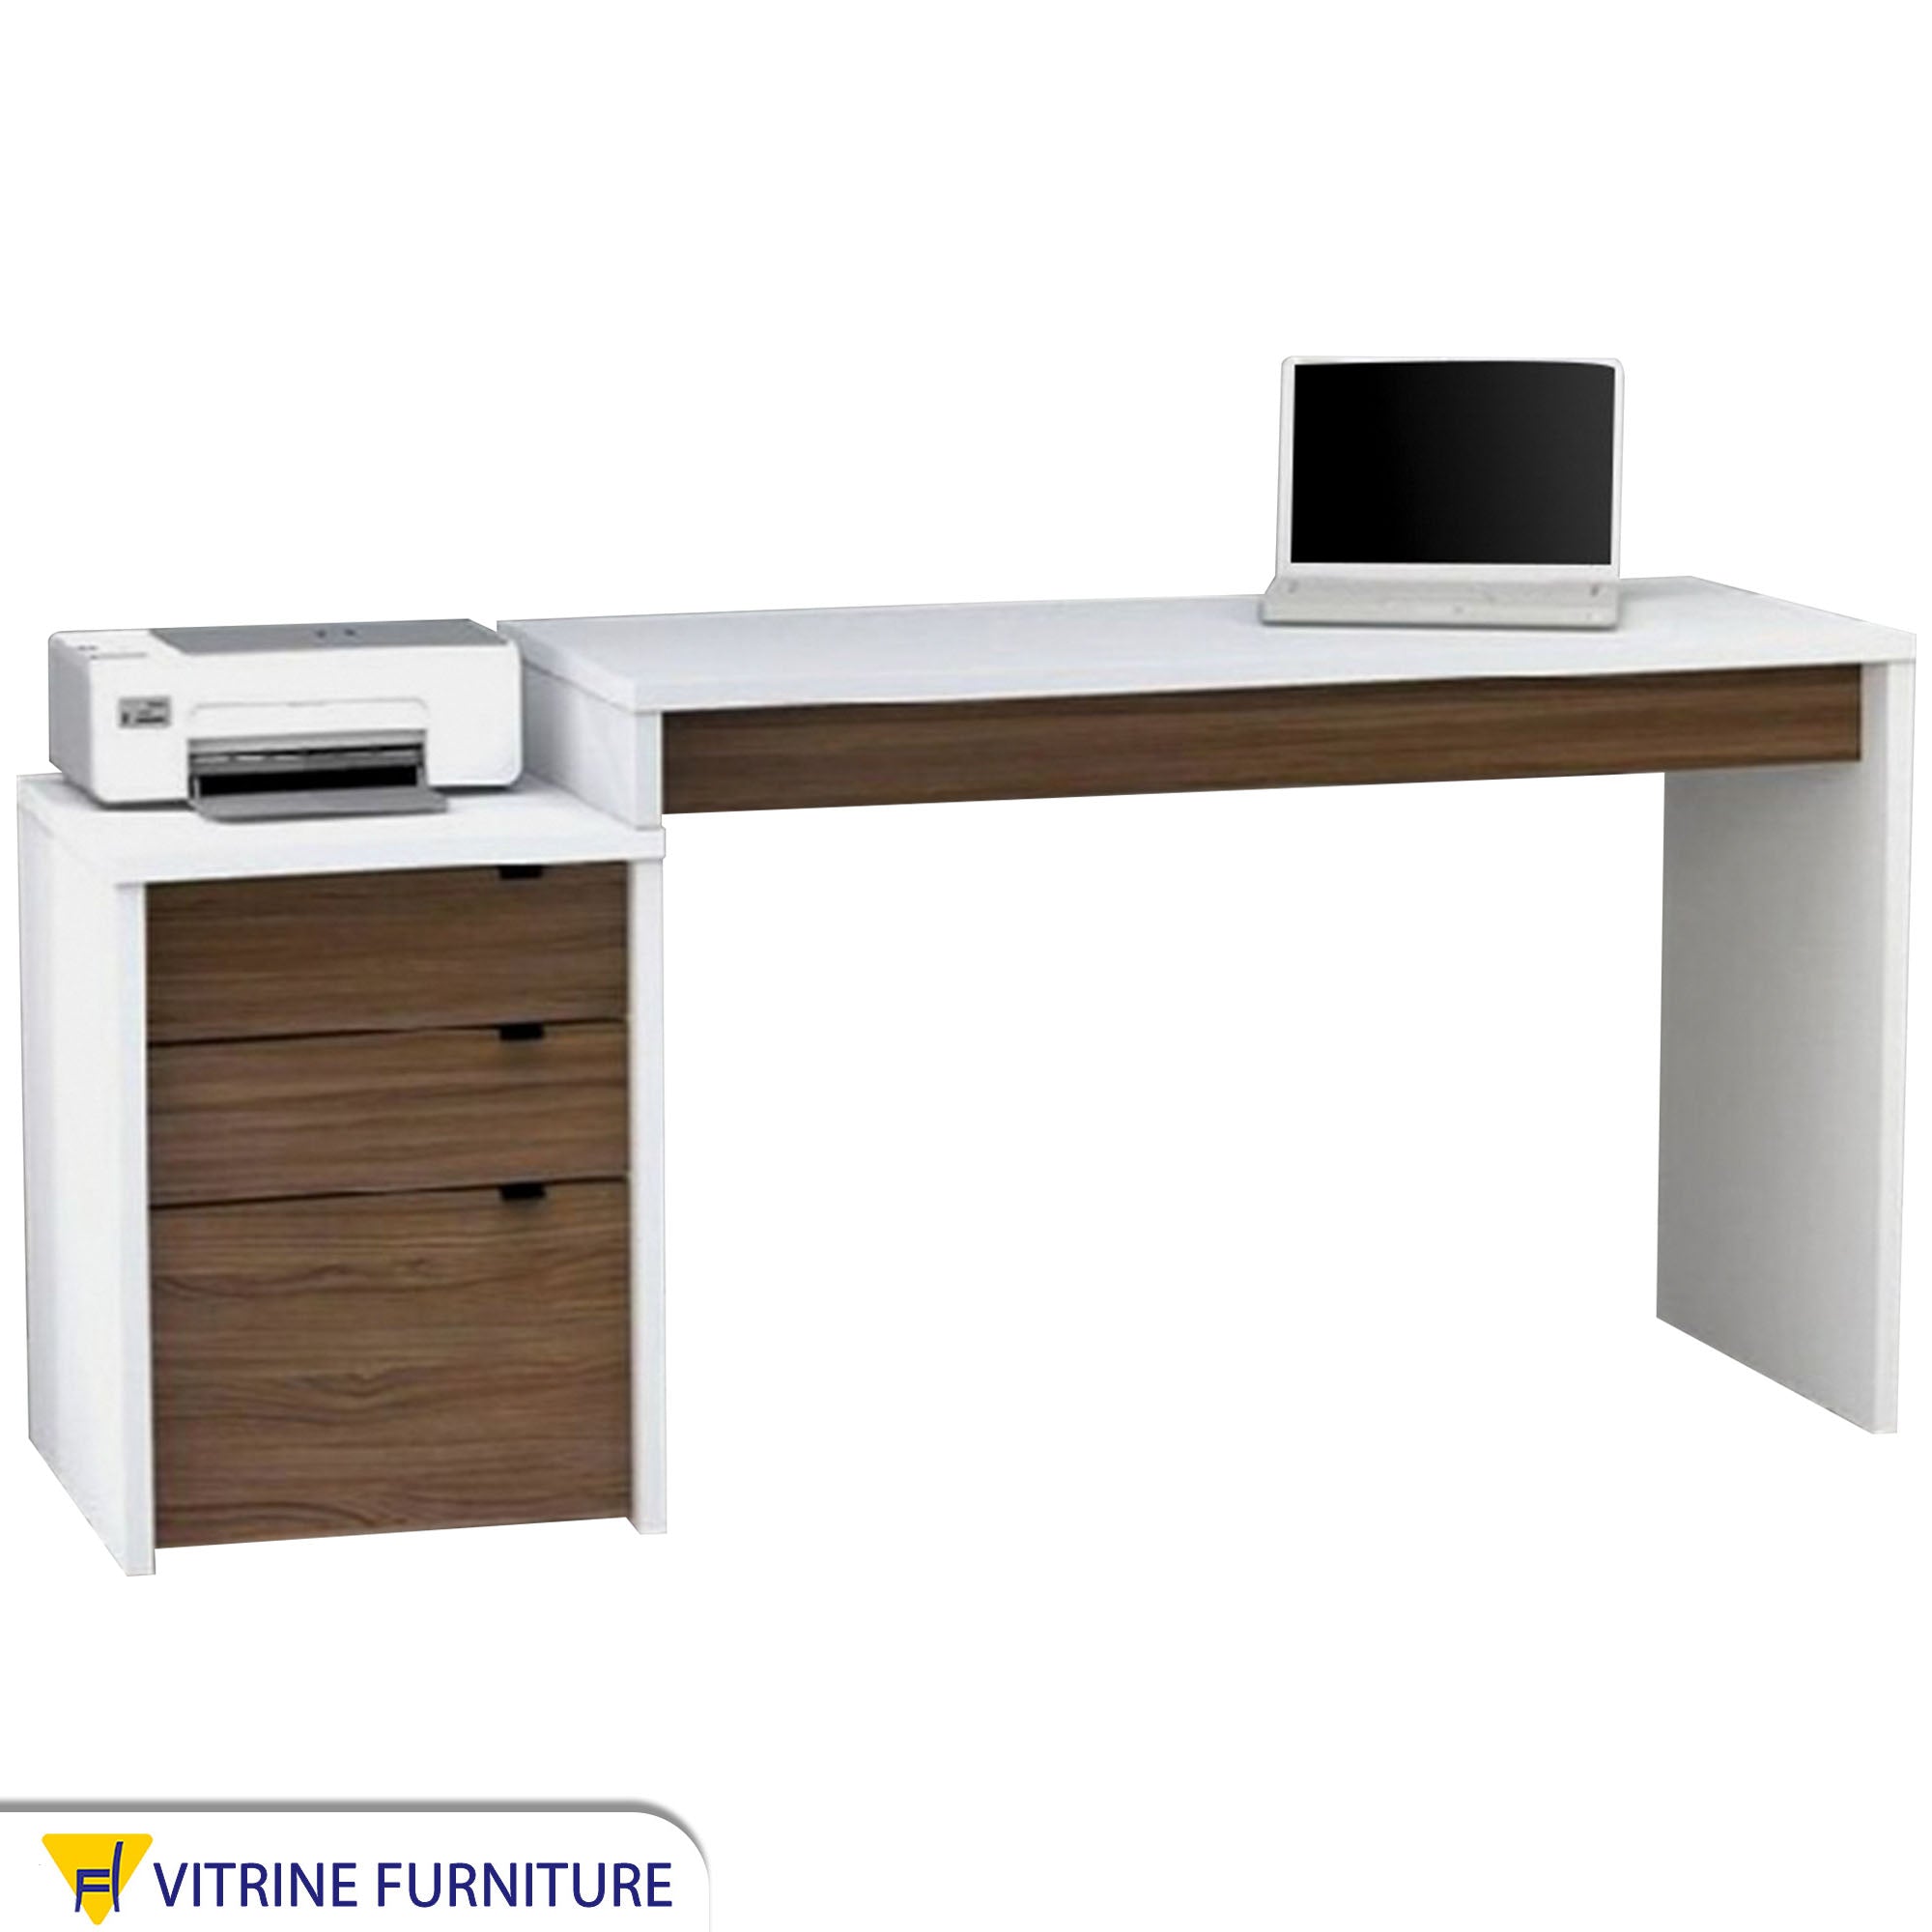 White and brown wooden desk